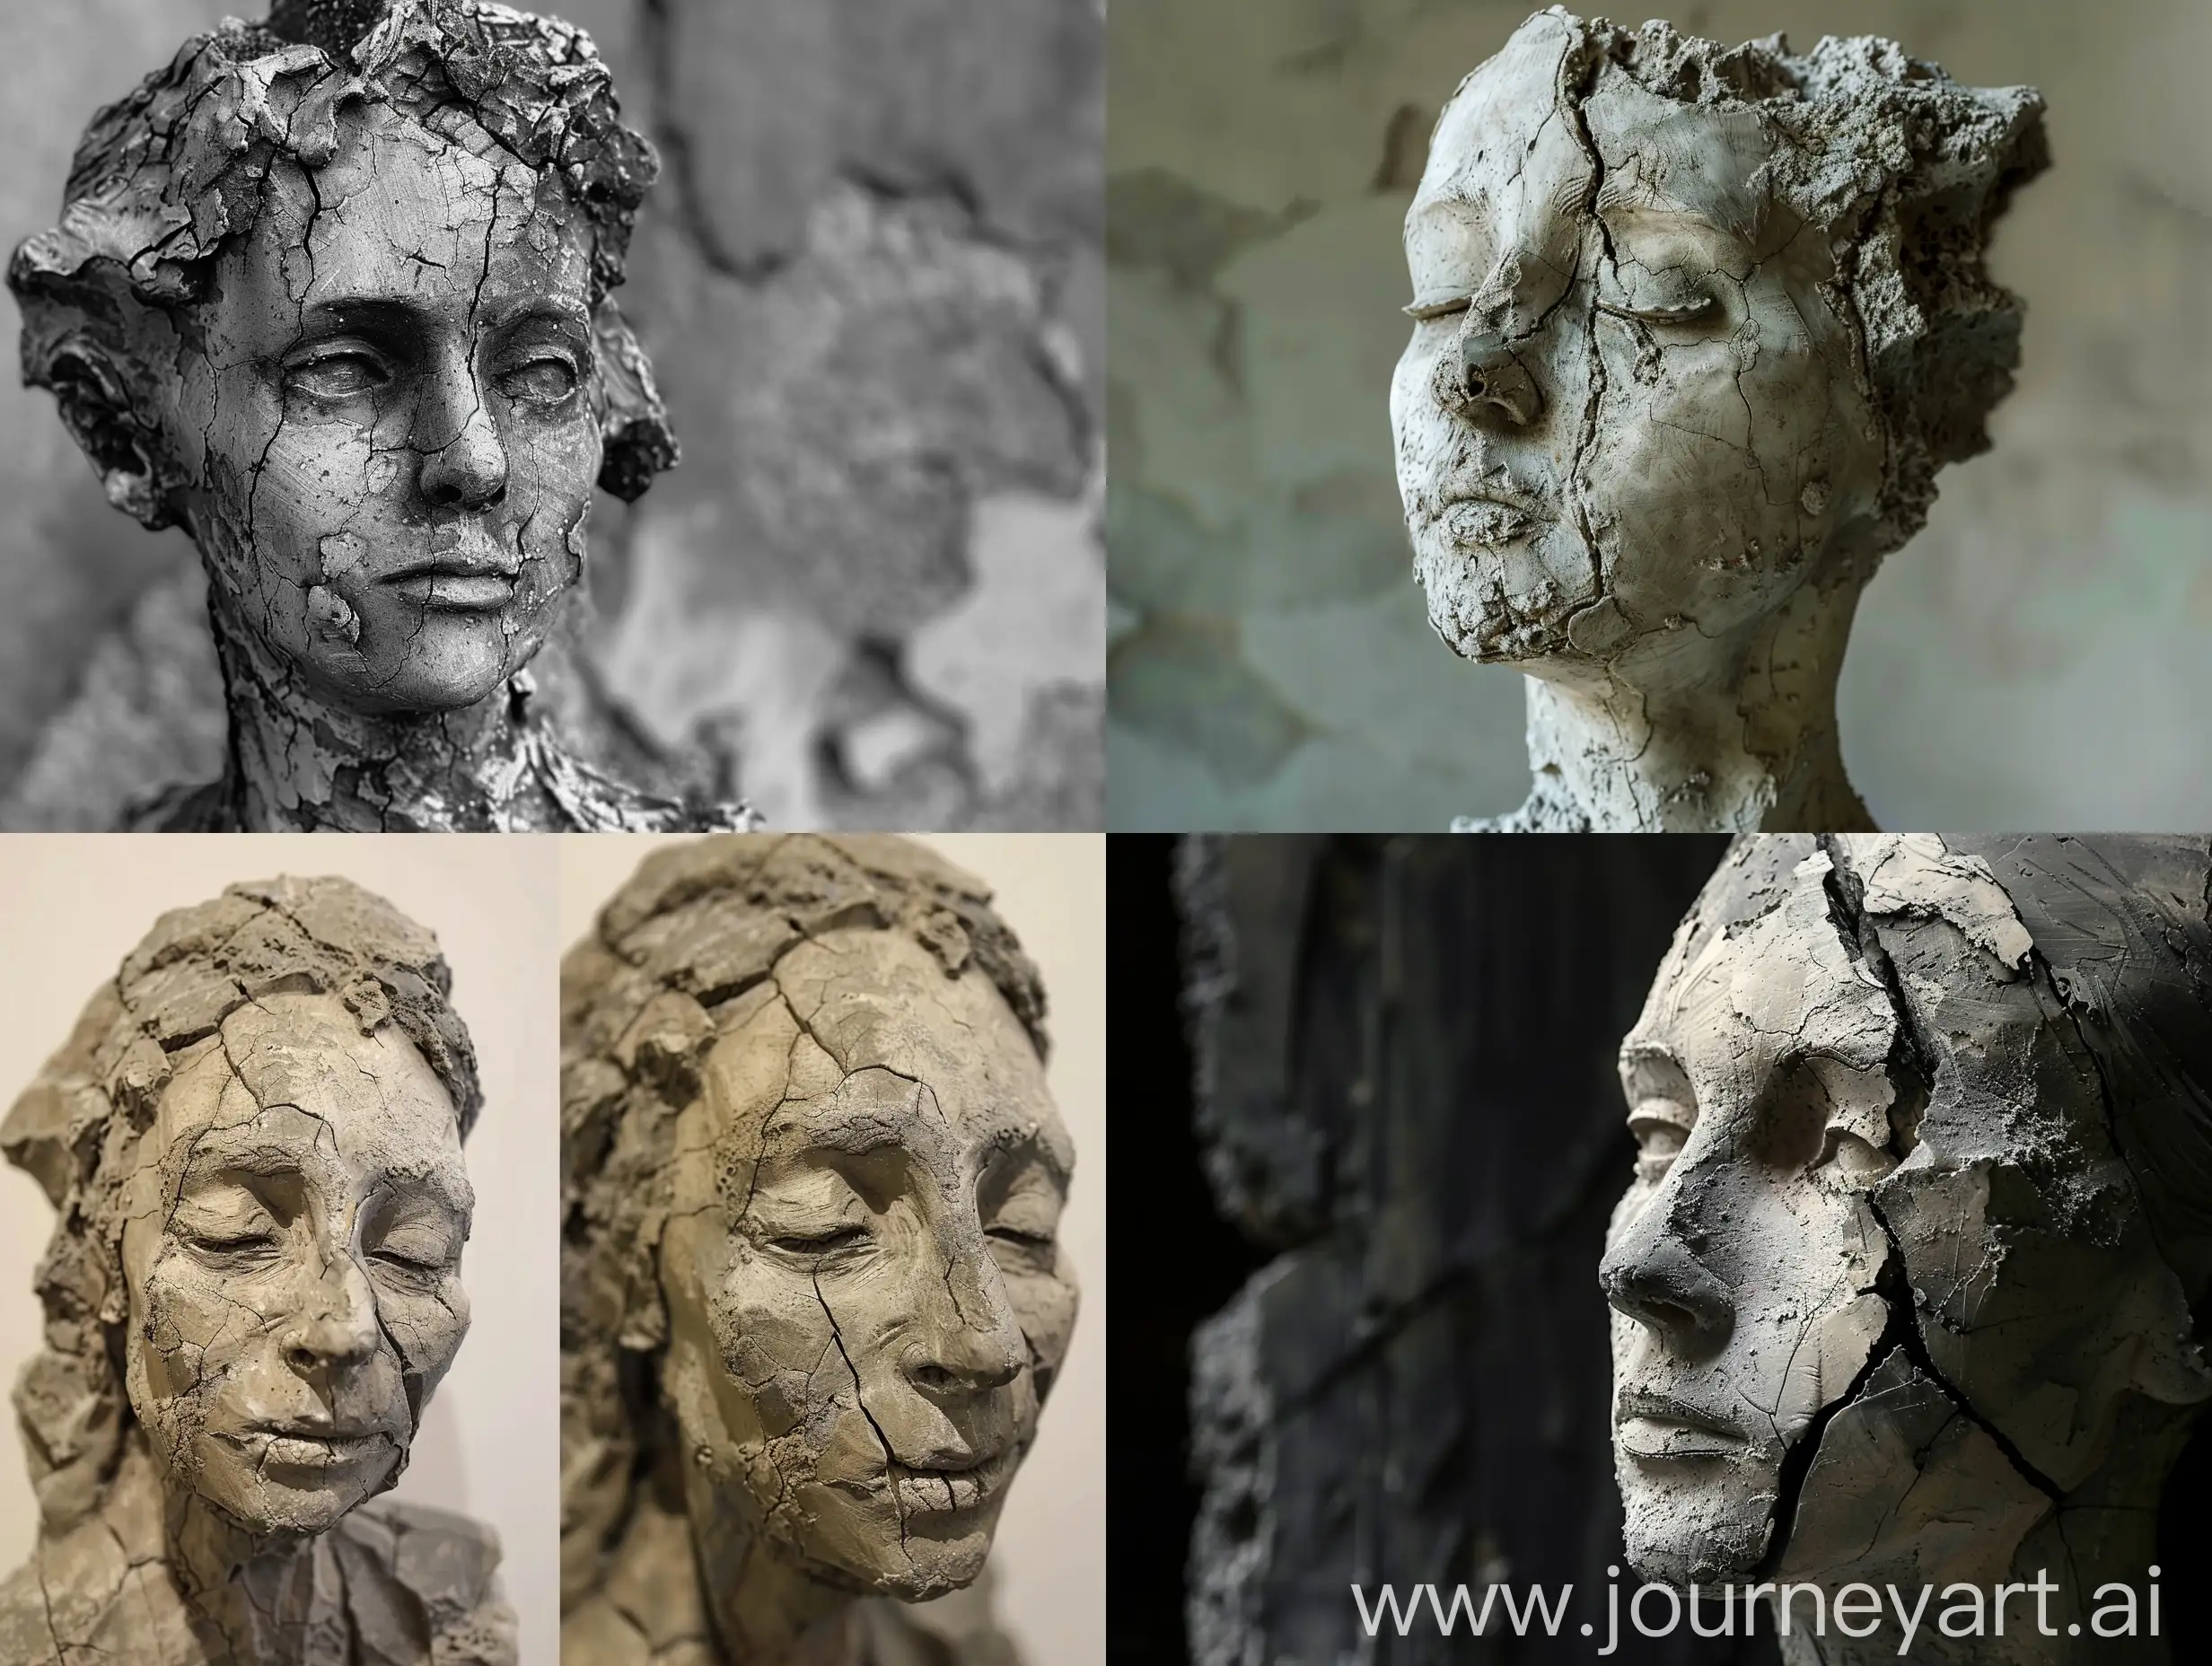 Ethereal-Stone-Statue-of-a-Woman-Emerging-from-Natures-Elements